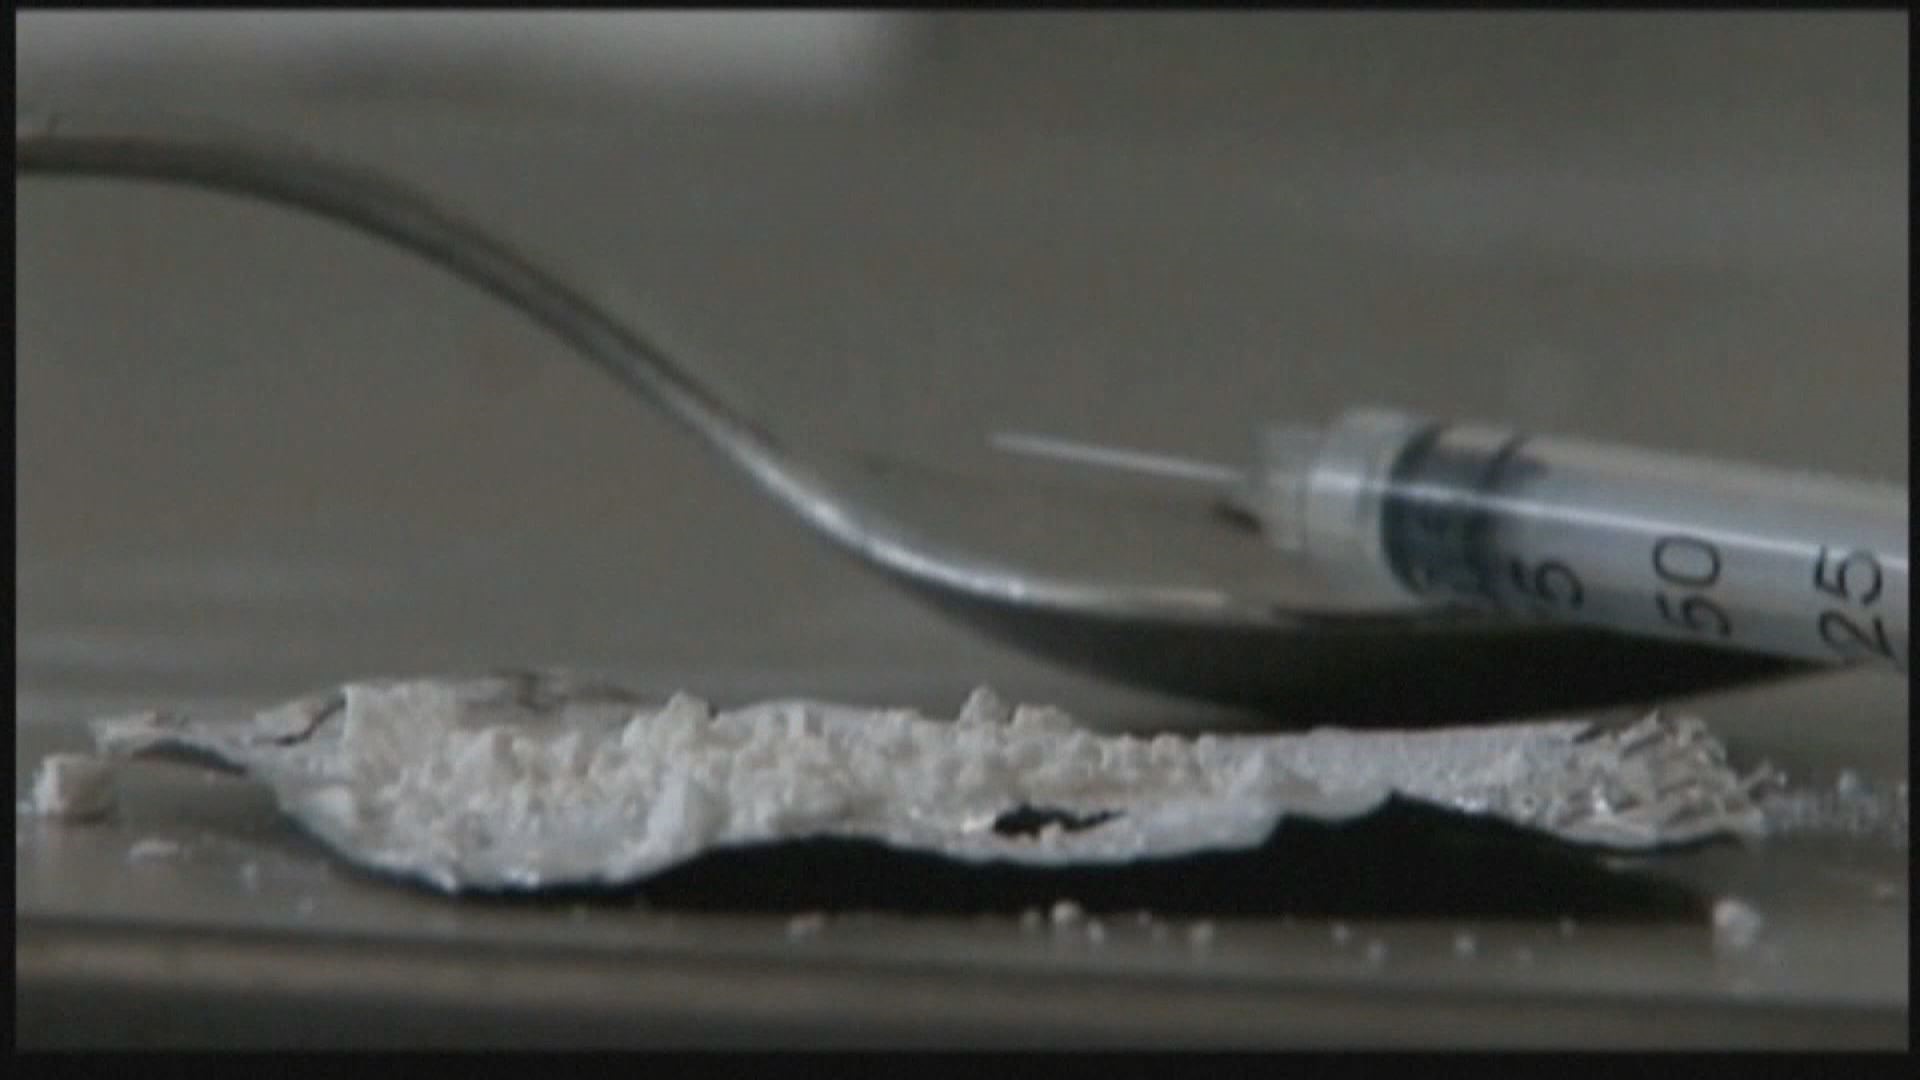 GDPH said its receiving more calls with drugs laced with fentanyl.